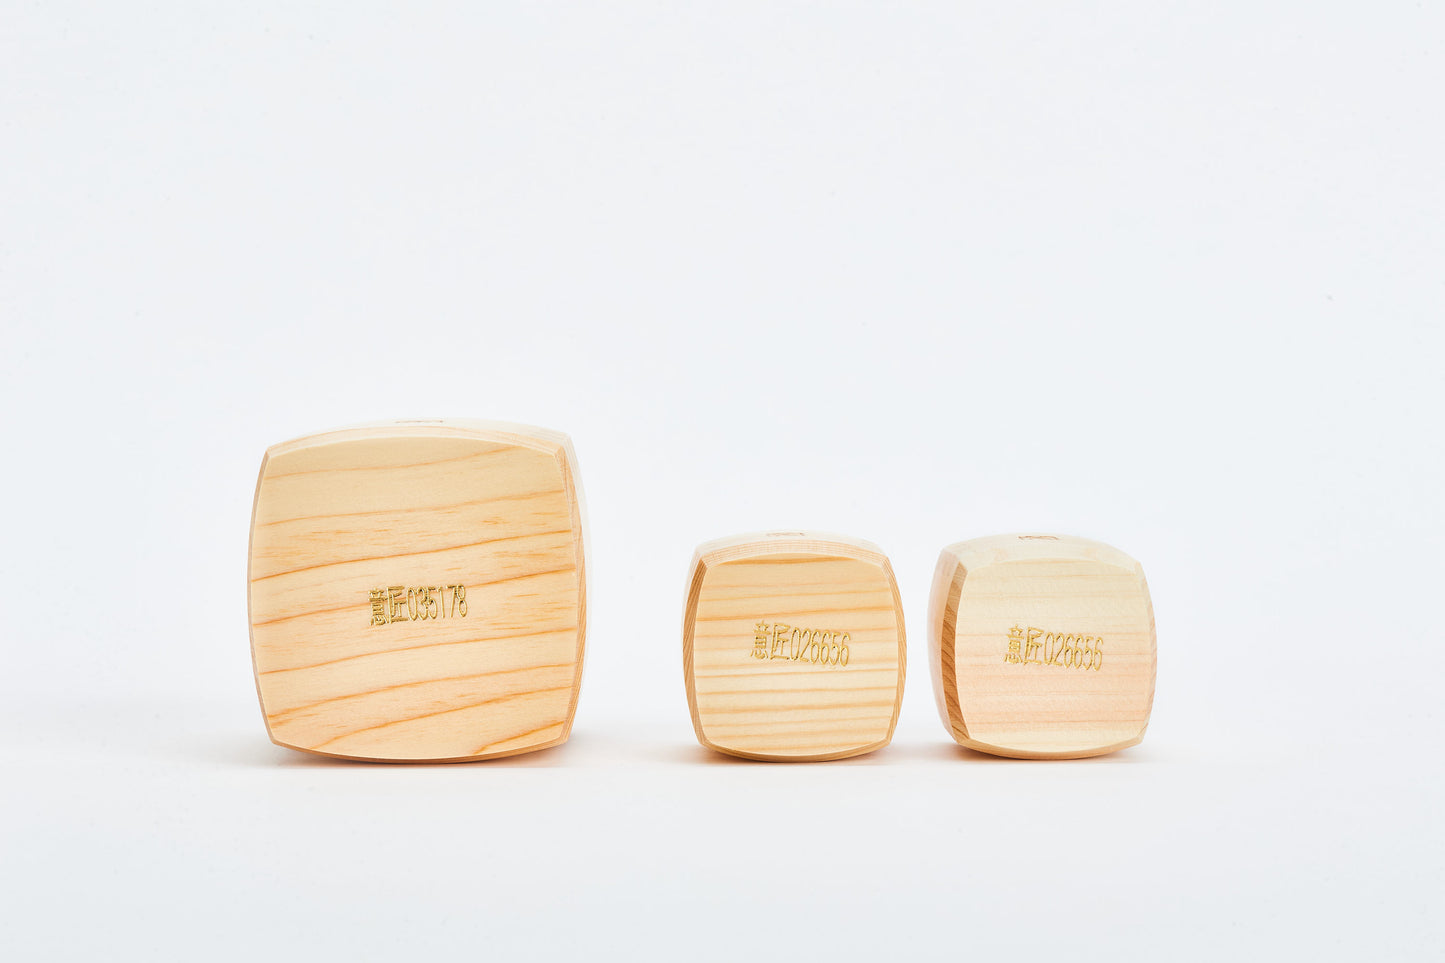 Hinoki Sake Bottle and Cups - Lucid and Real